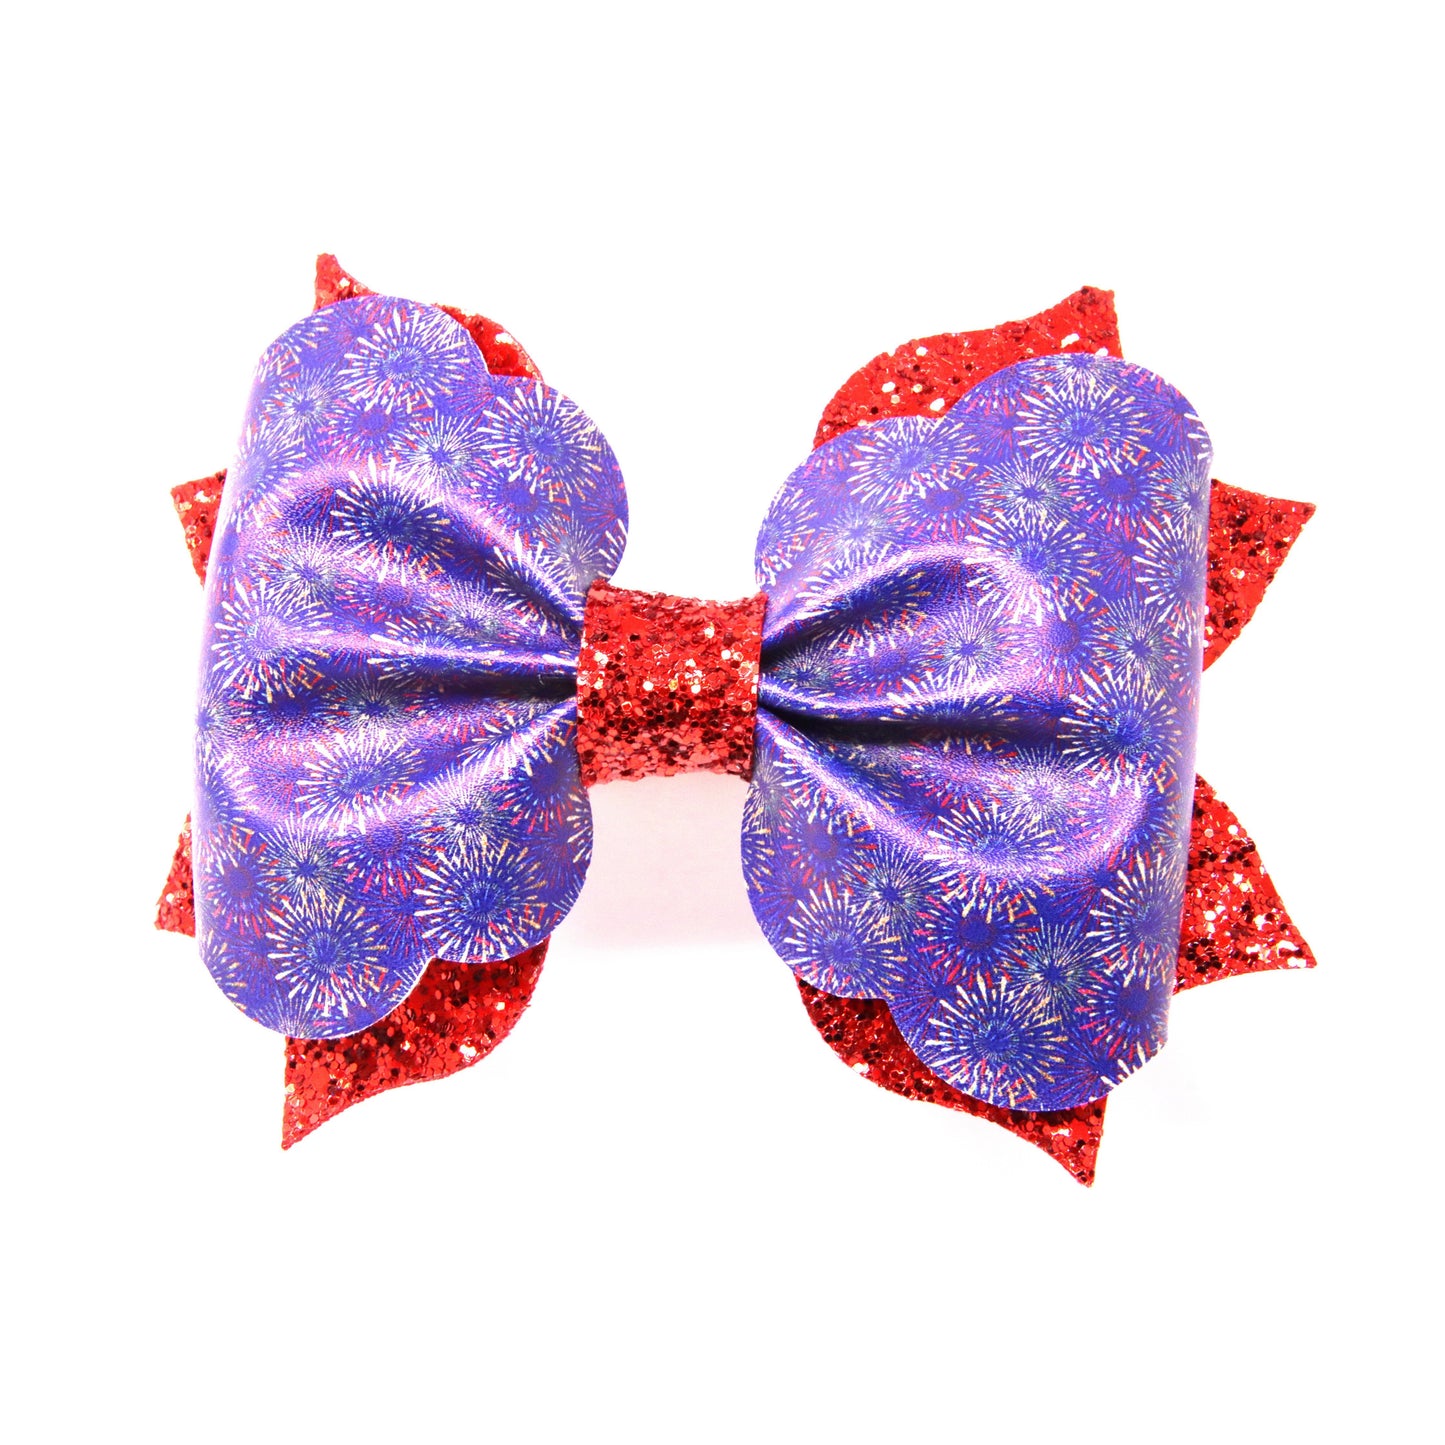 Fireworks with Red Chunky Glitter Poppy Pinch Bow